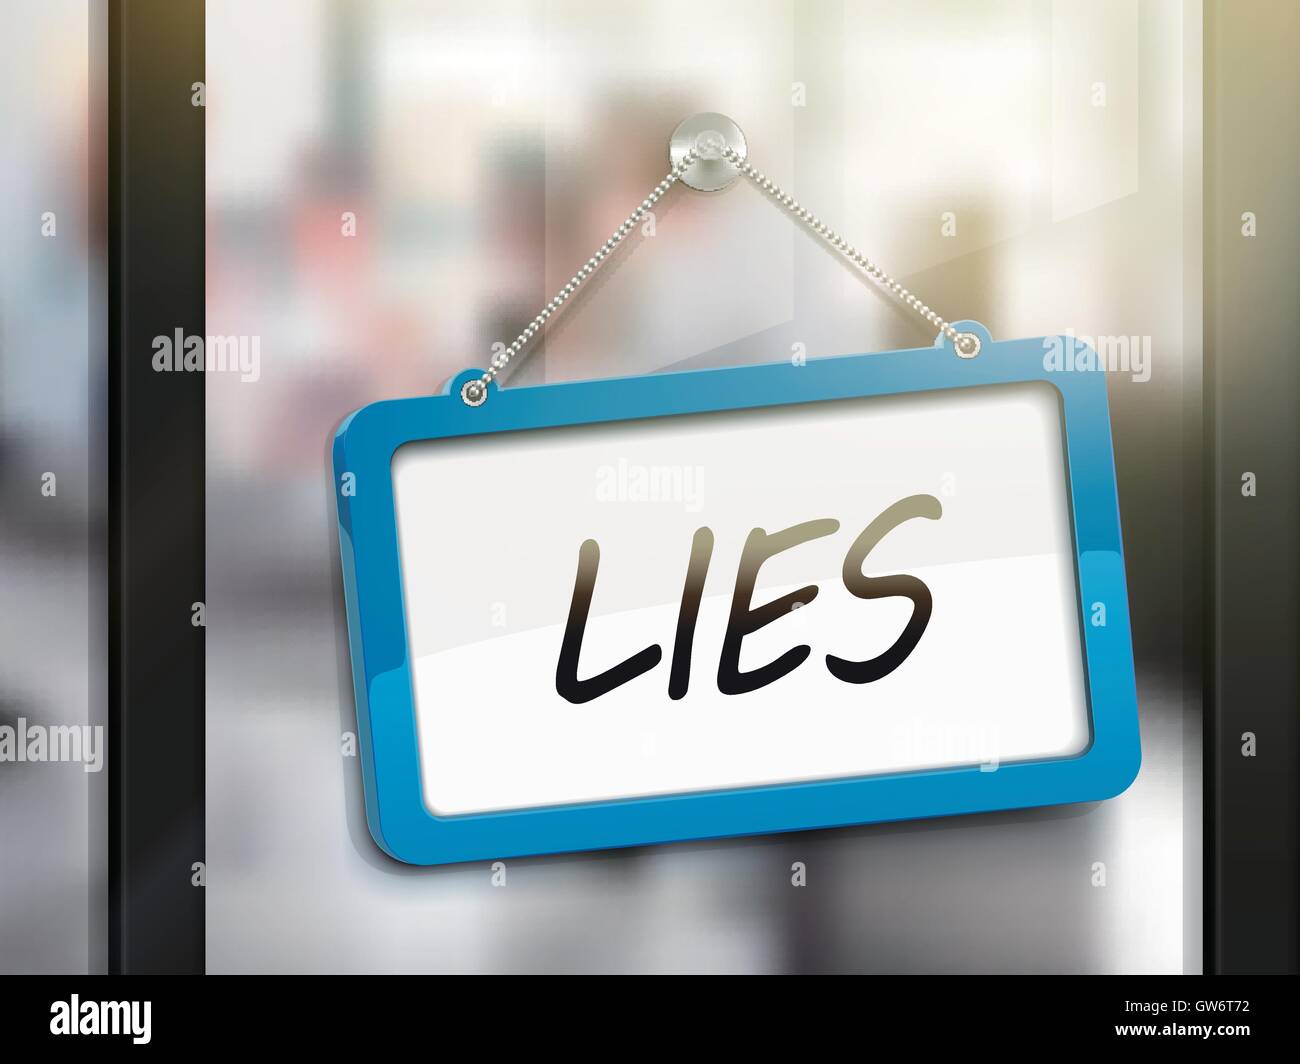 lies hanging sign, 3D illustration isolated on office glass door Stock Vector